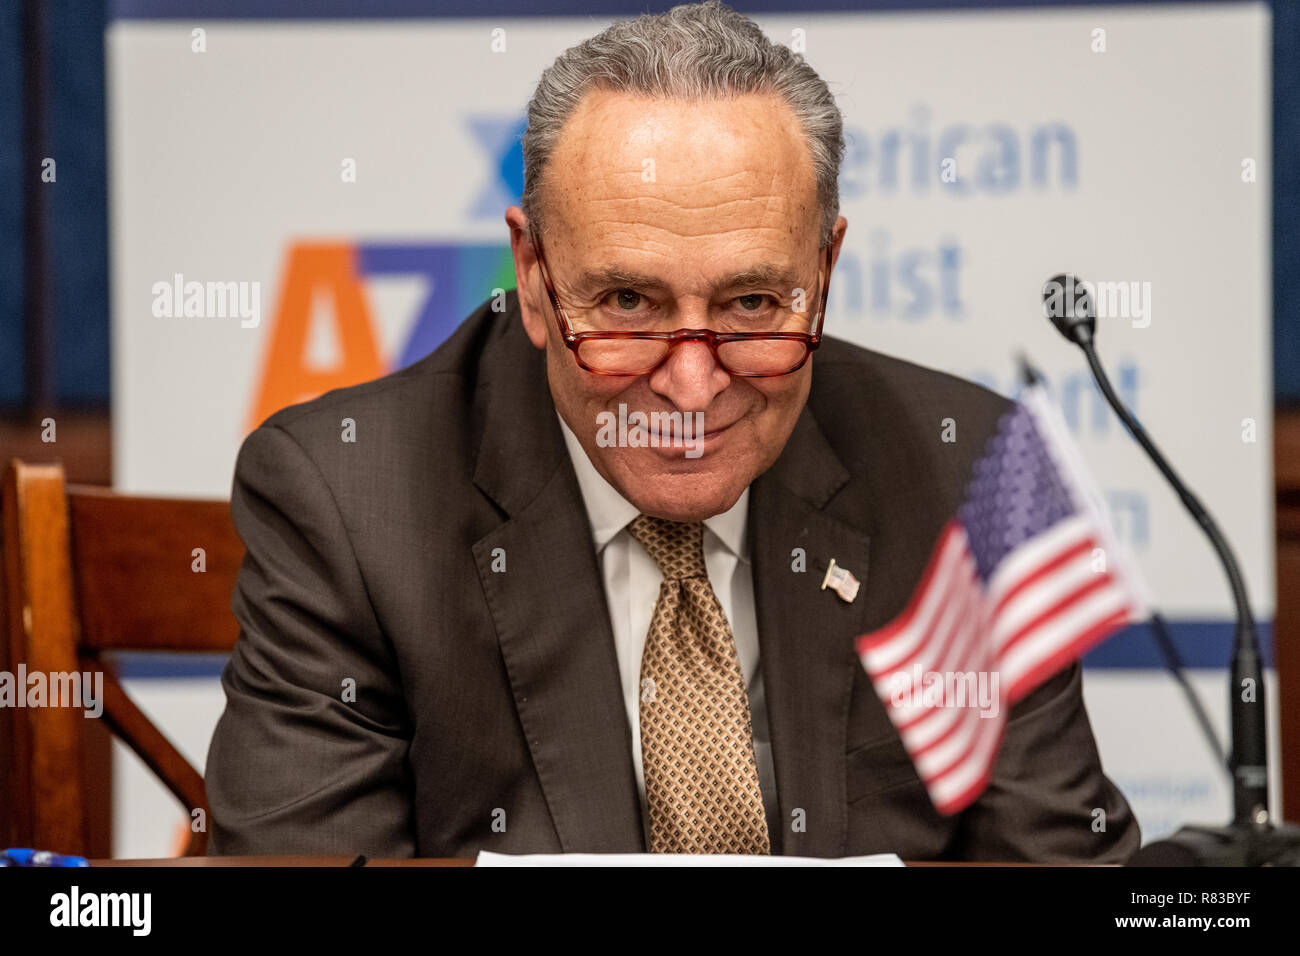 Washington DC, USA. 12th Dec 2018. US Senator Chuck Schumer (Charles Schumer) (D-NY) at the American Zionist Movement / AZM Washington Forum: Renewing the Bipartisan Commitment Standing with Israel and Zionism in the Capitol Visitor Center in Washington, DC on December 12, 2018. Credit: Michael Brochstein/Alamy Live News Stock Photo